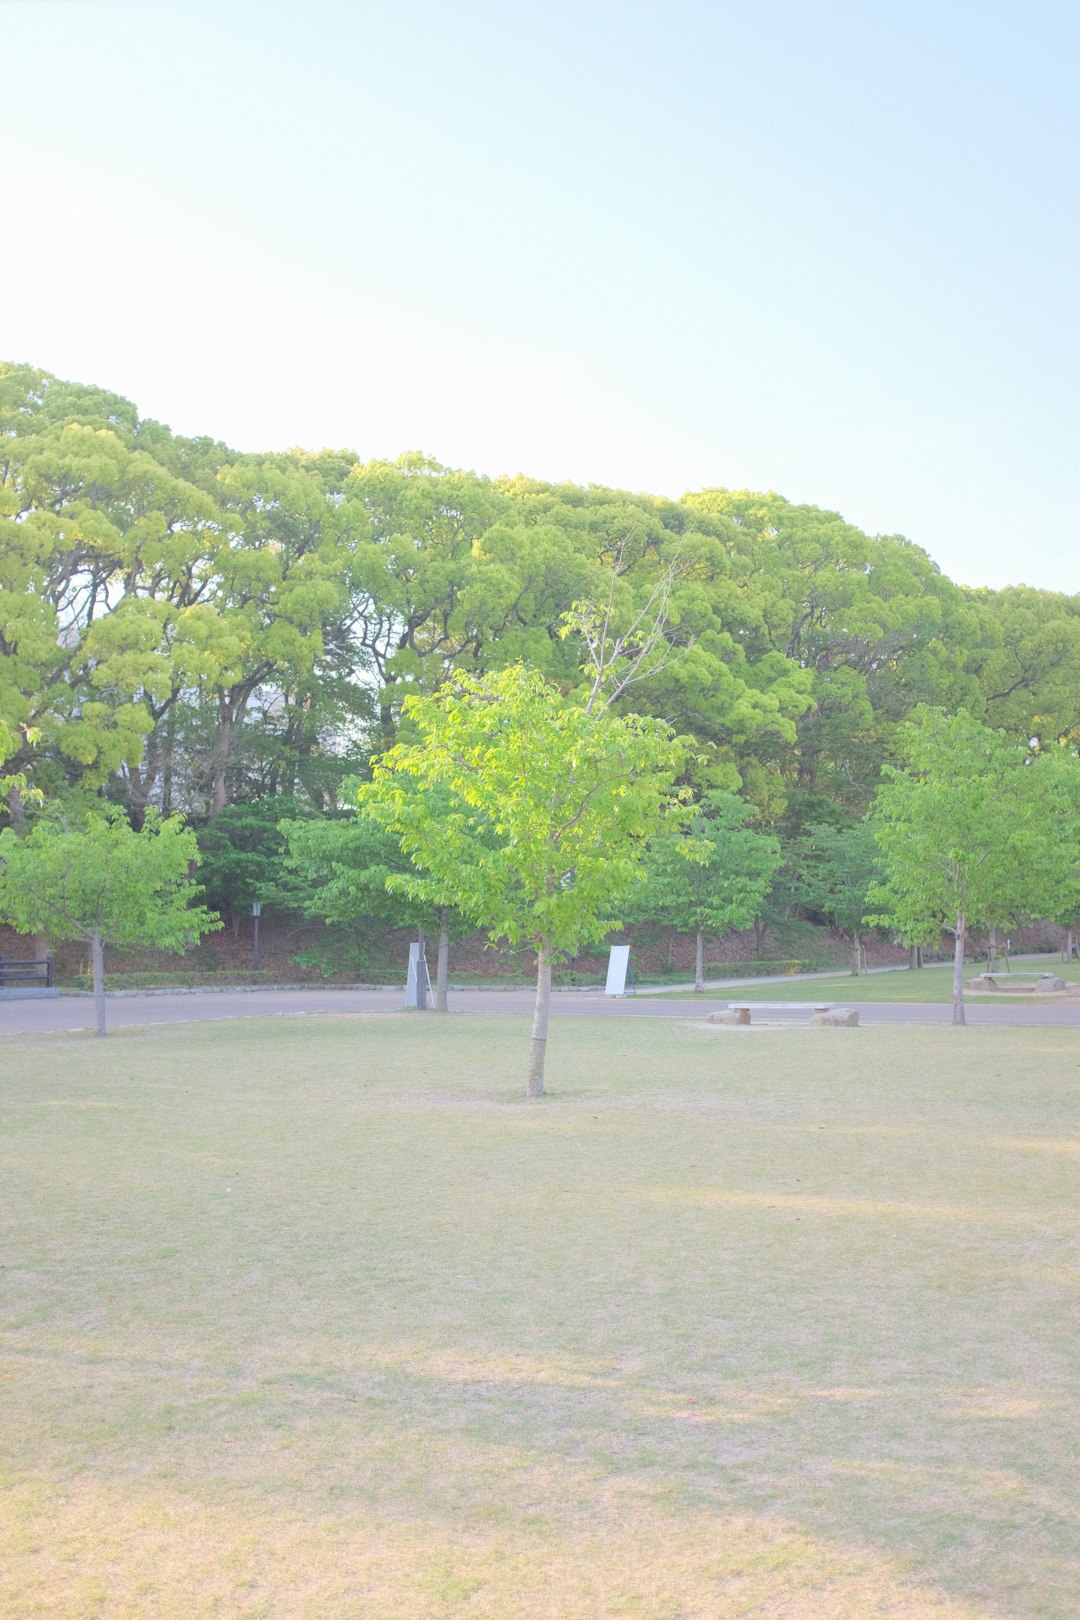 green trees on green grass field during daytime